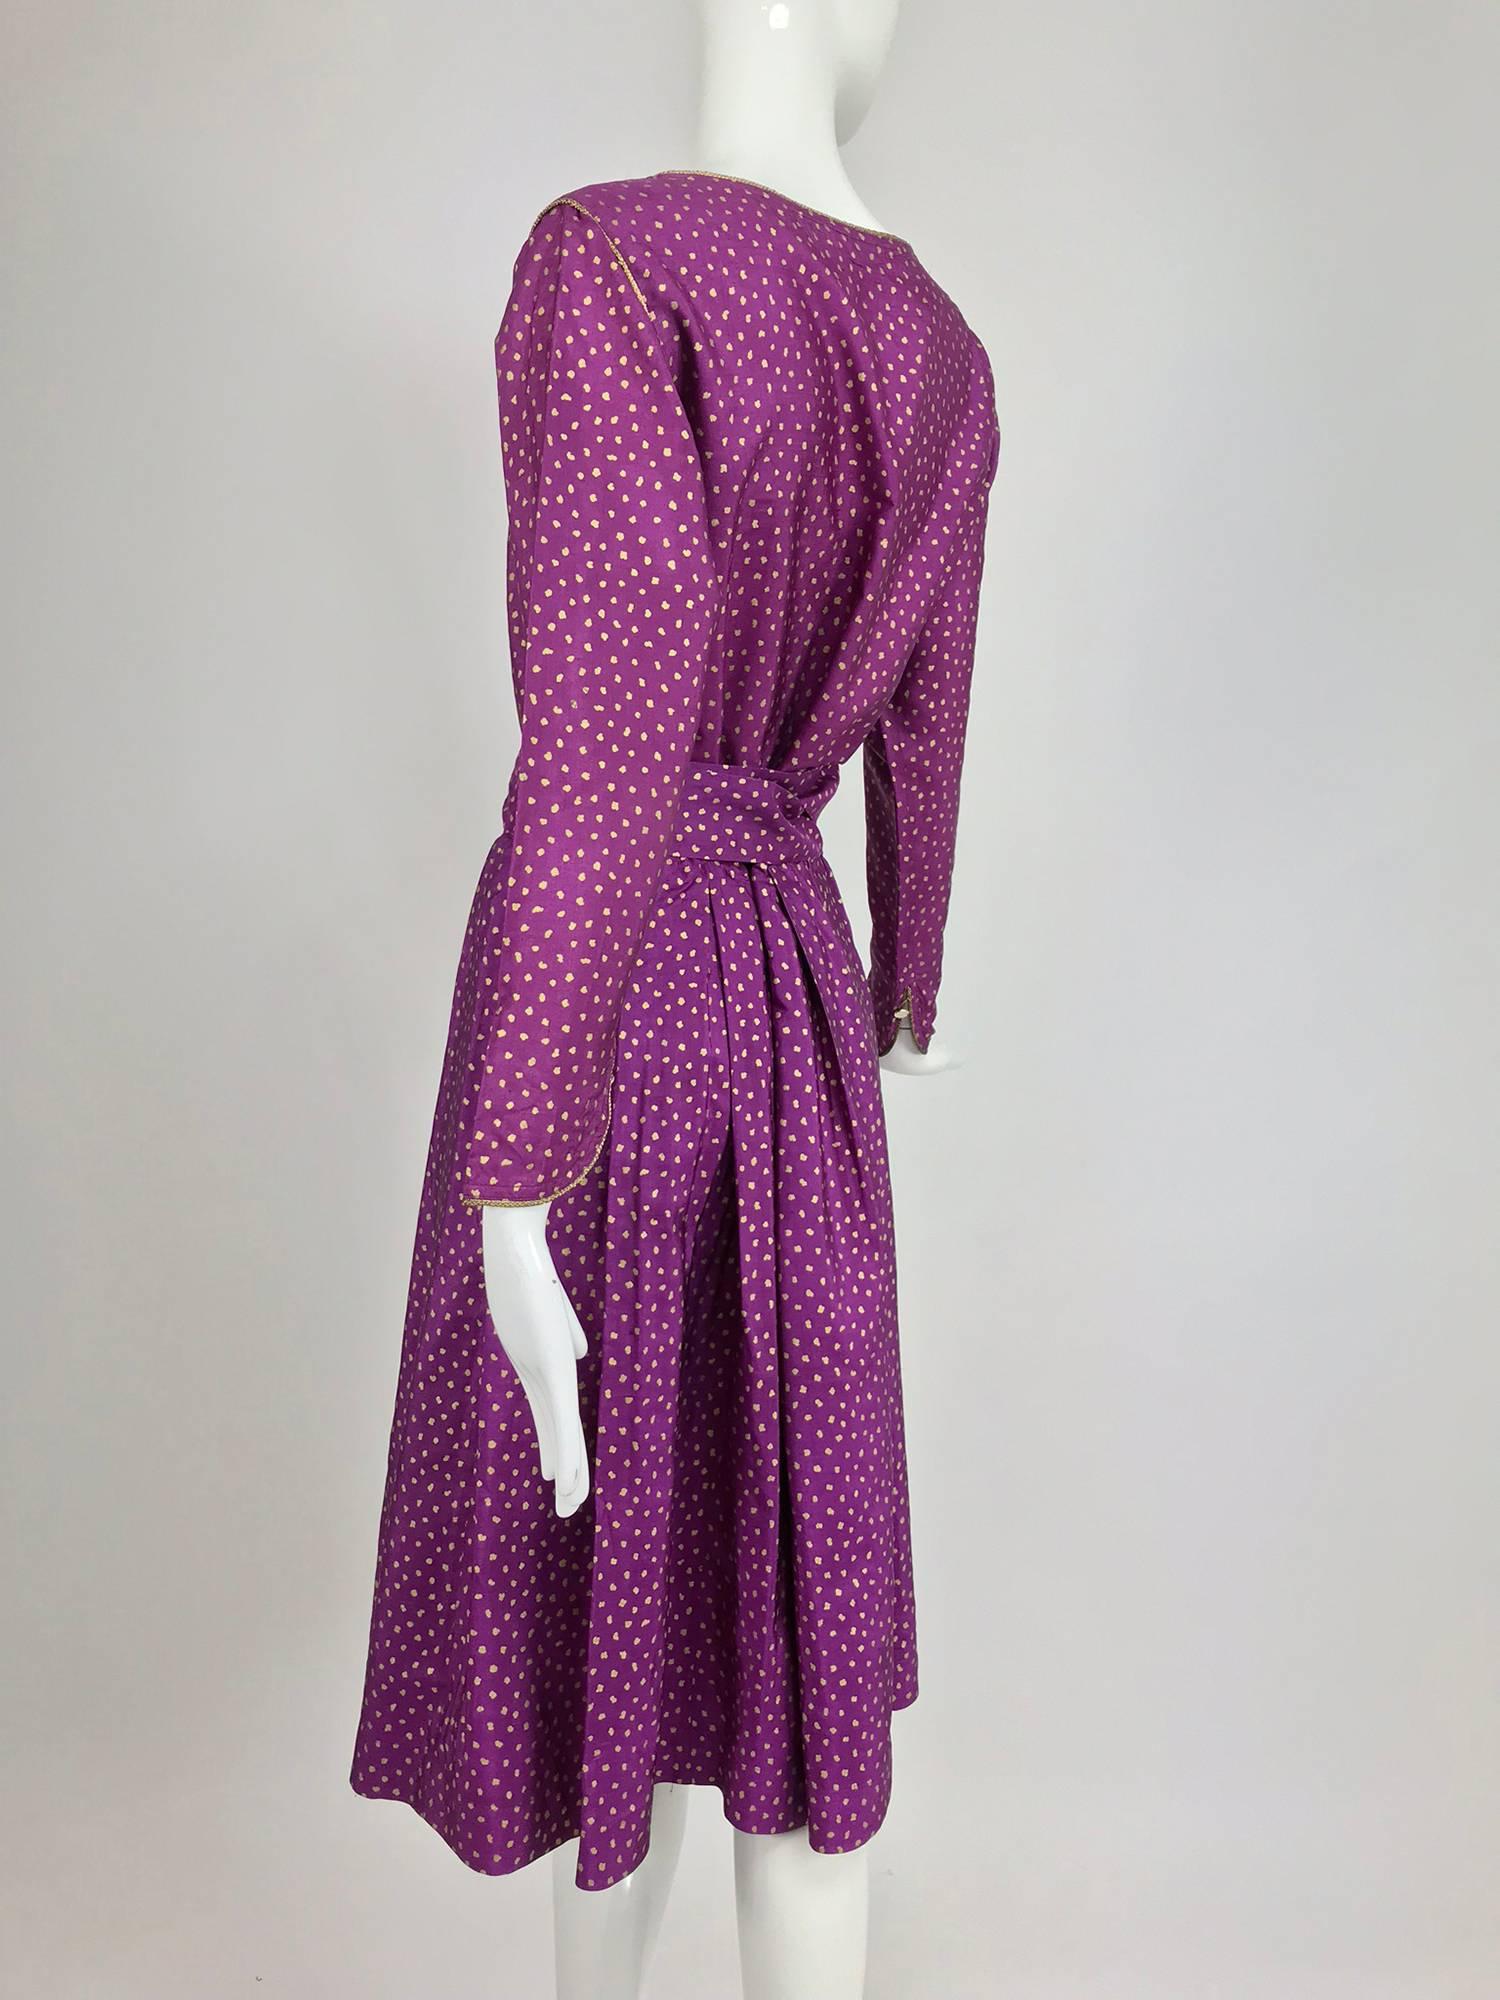 Yves Saint Laurent fuchsia silk with gold print top, skirt and belt from the 1970s...Amazing colour and the print really pops!  The button front long sleeve blouse has a scoop neckline with gold cord trim and gold buttons at the front, the shaped